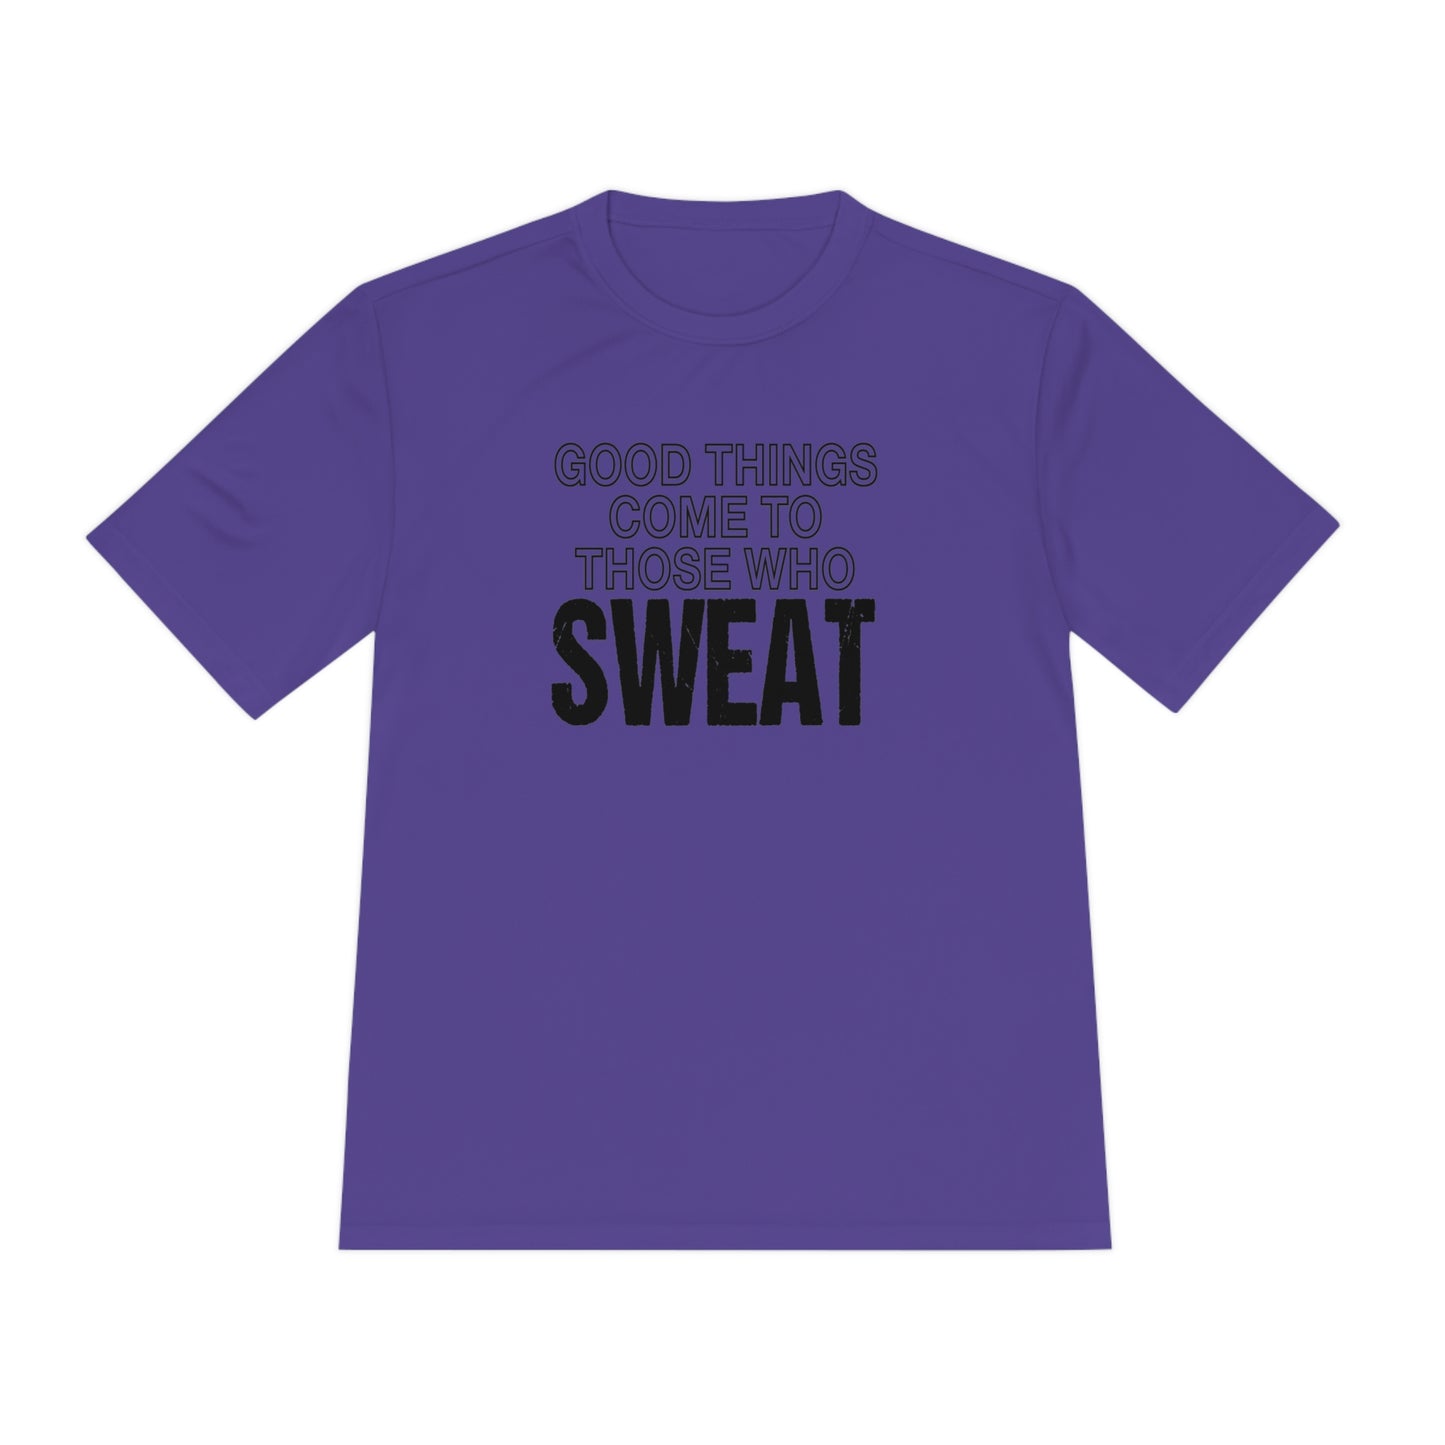 Good Things Come to Those Who Sweat - Unisex Sport-Tek Shirt